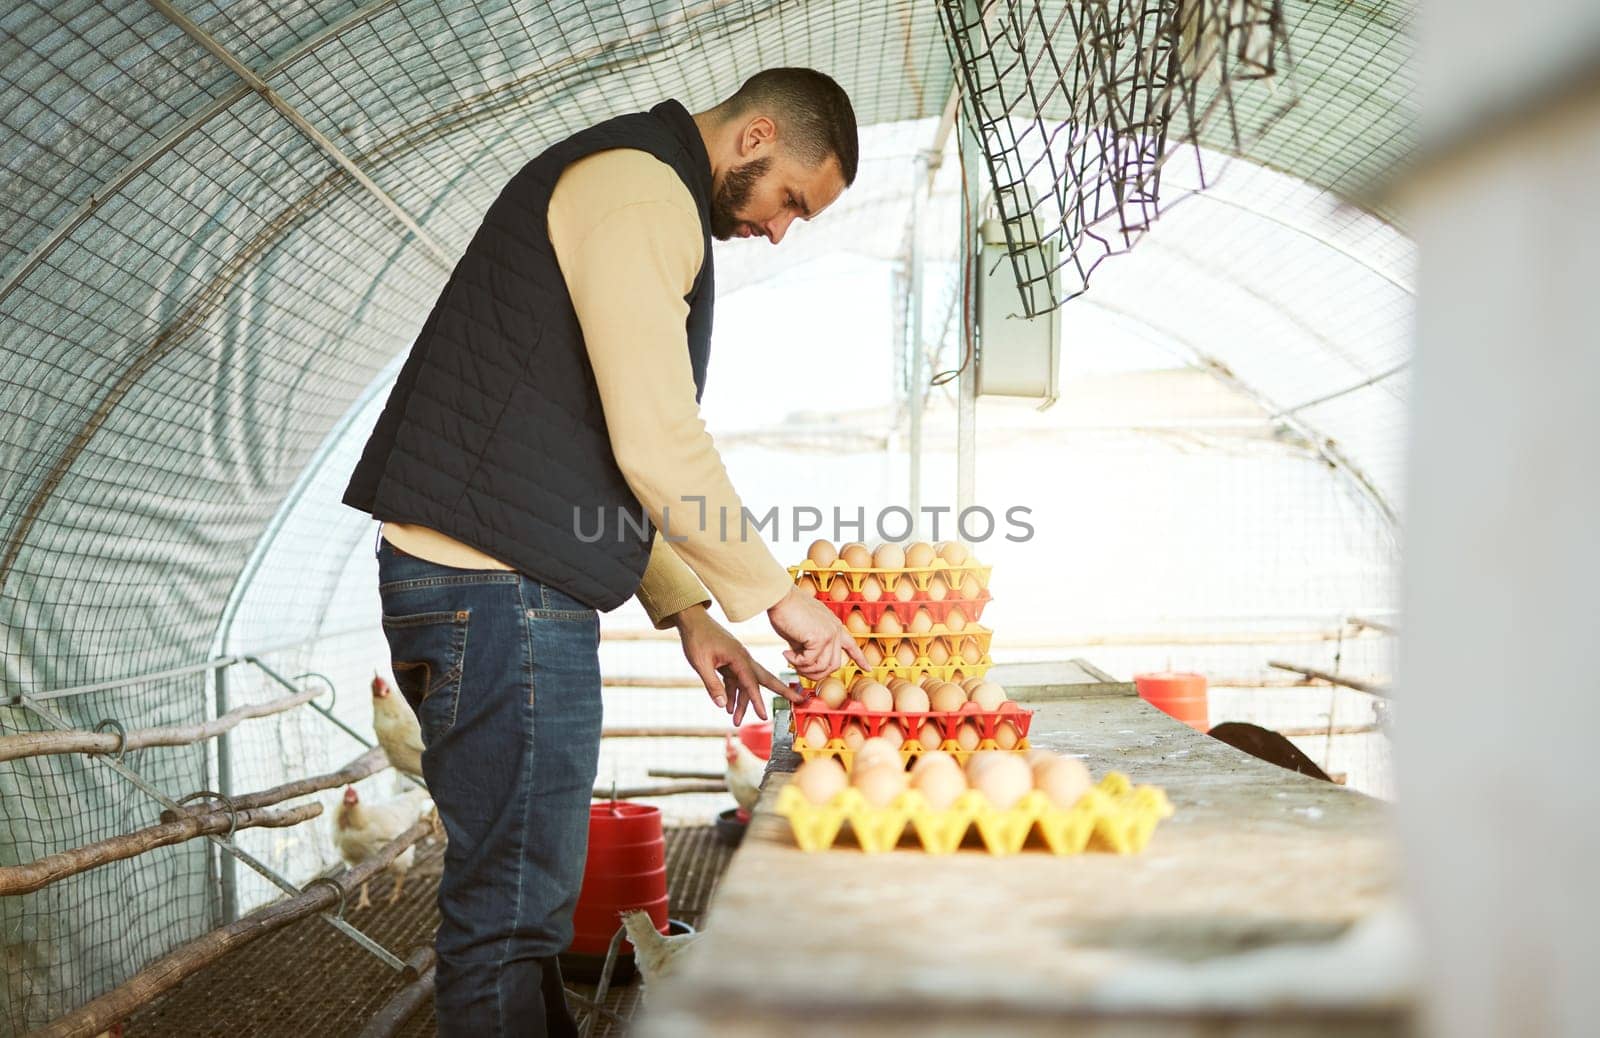 Chicken farmer, eggs and man on farm in barn checking egg quality assessment, tray organization and collection. Harvest, agriculture and poultry farming small business owner working in chicken coop